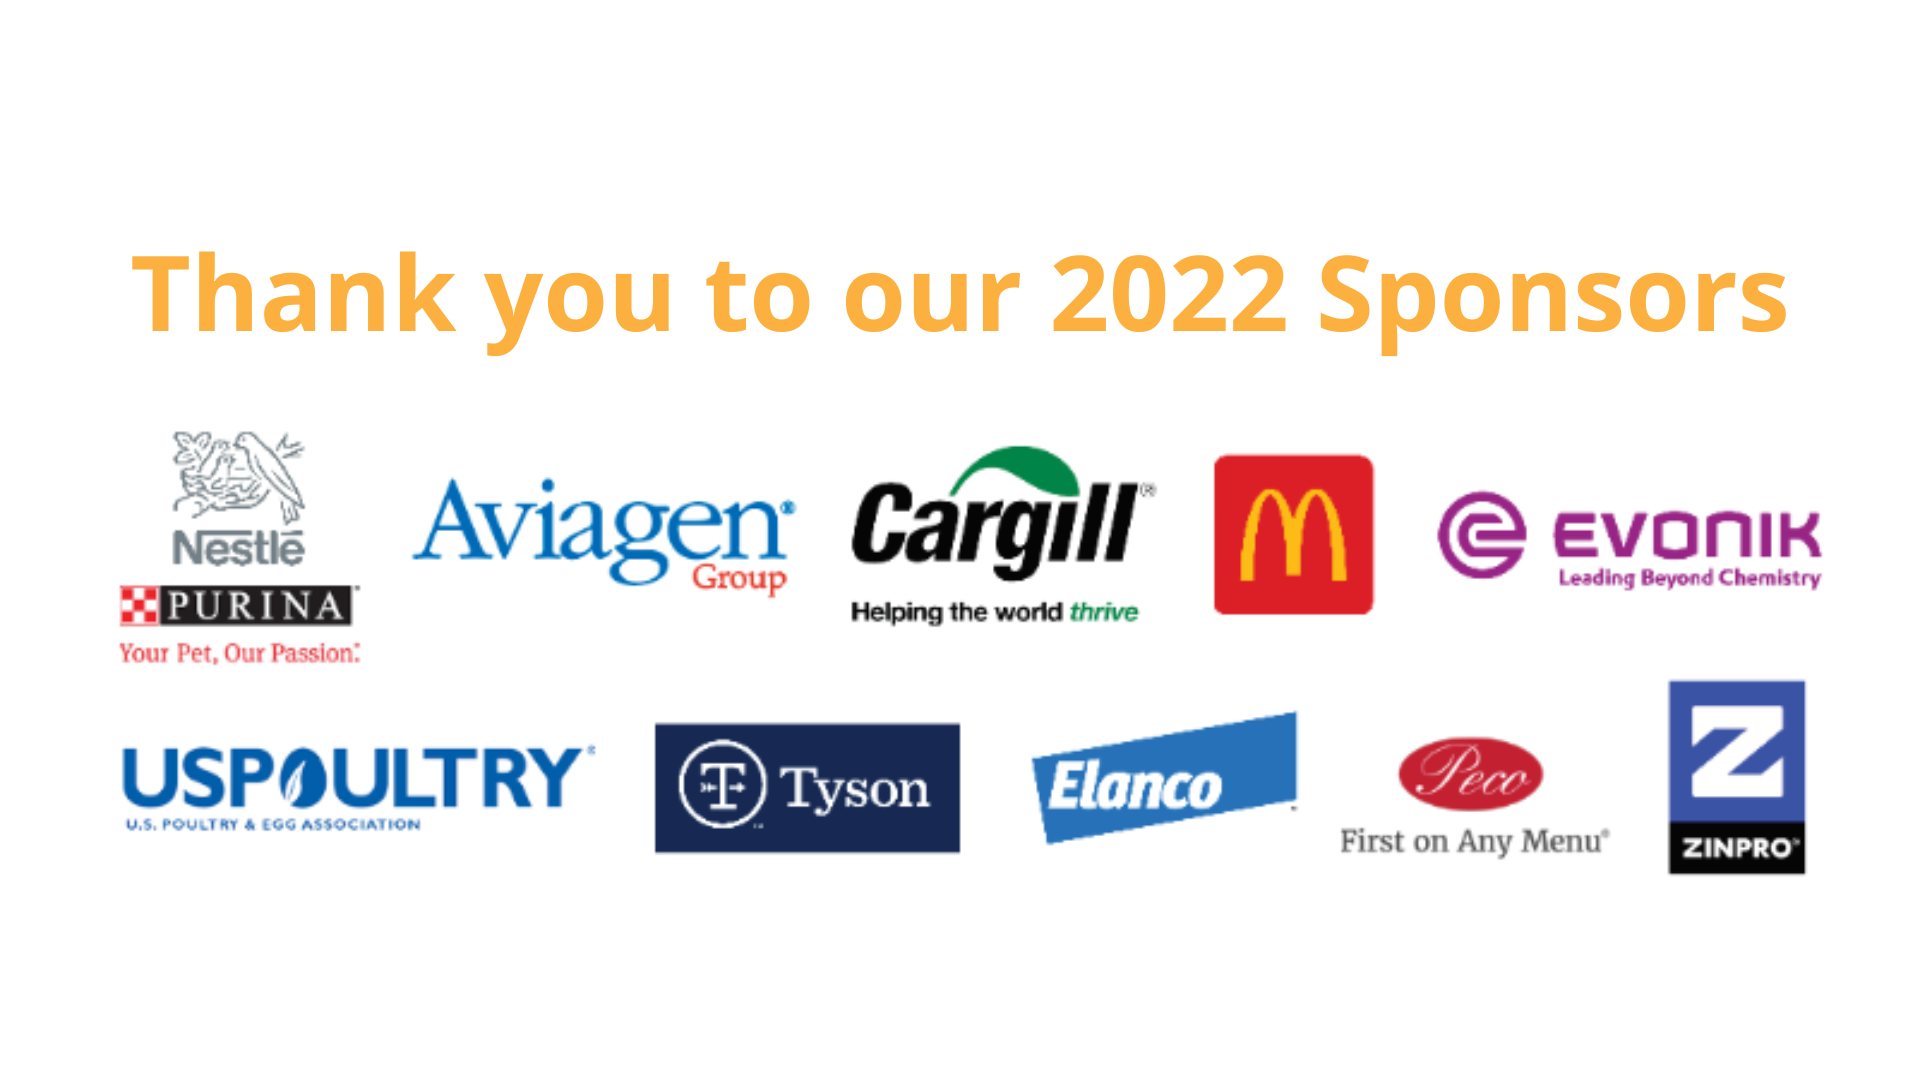 Thank you to our 2022 Sponsors